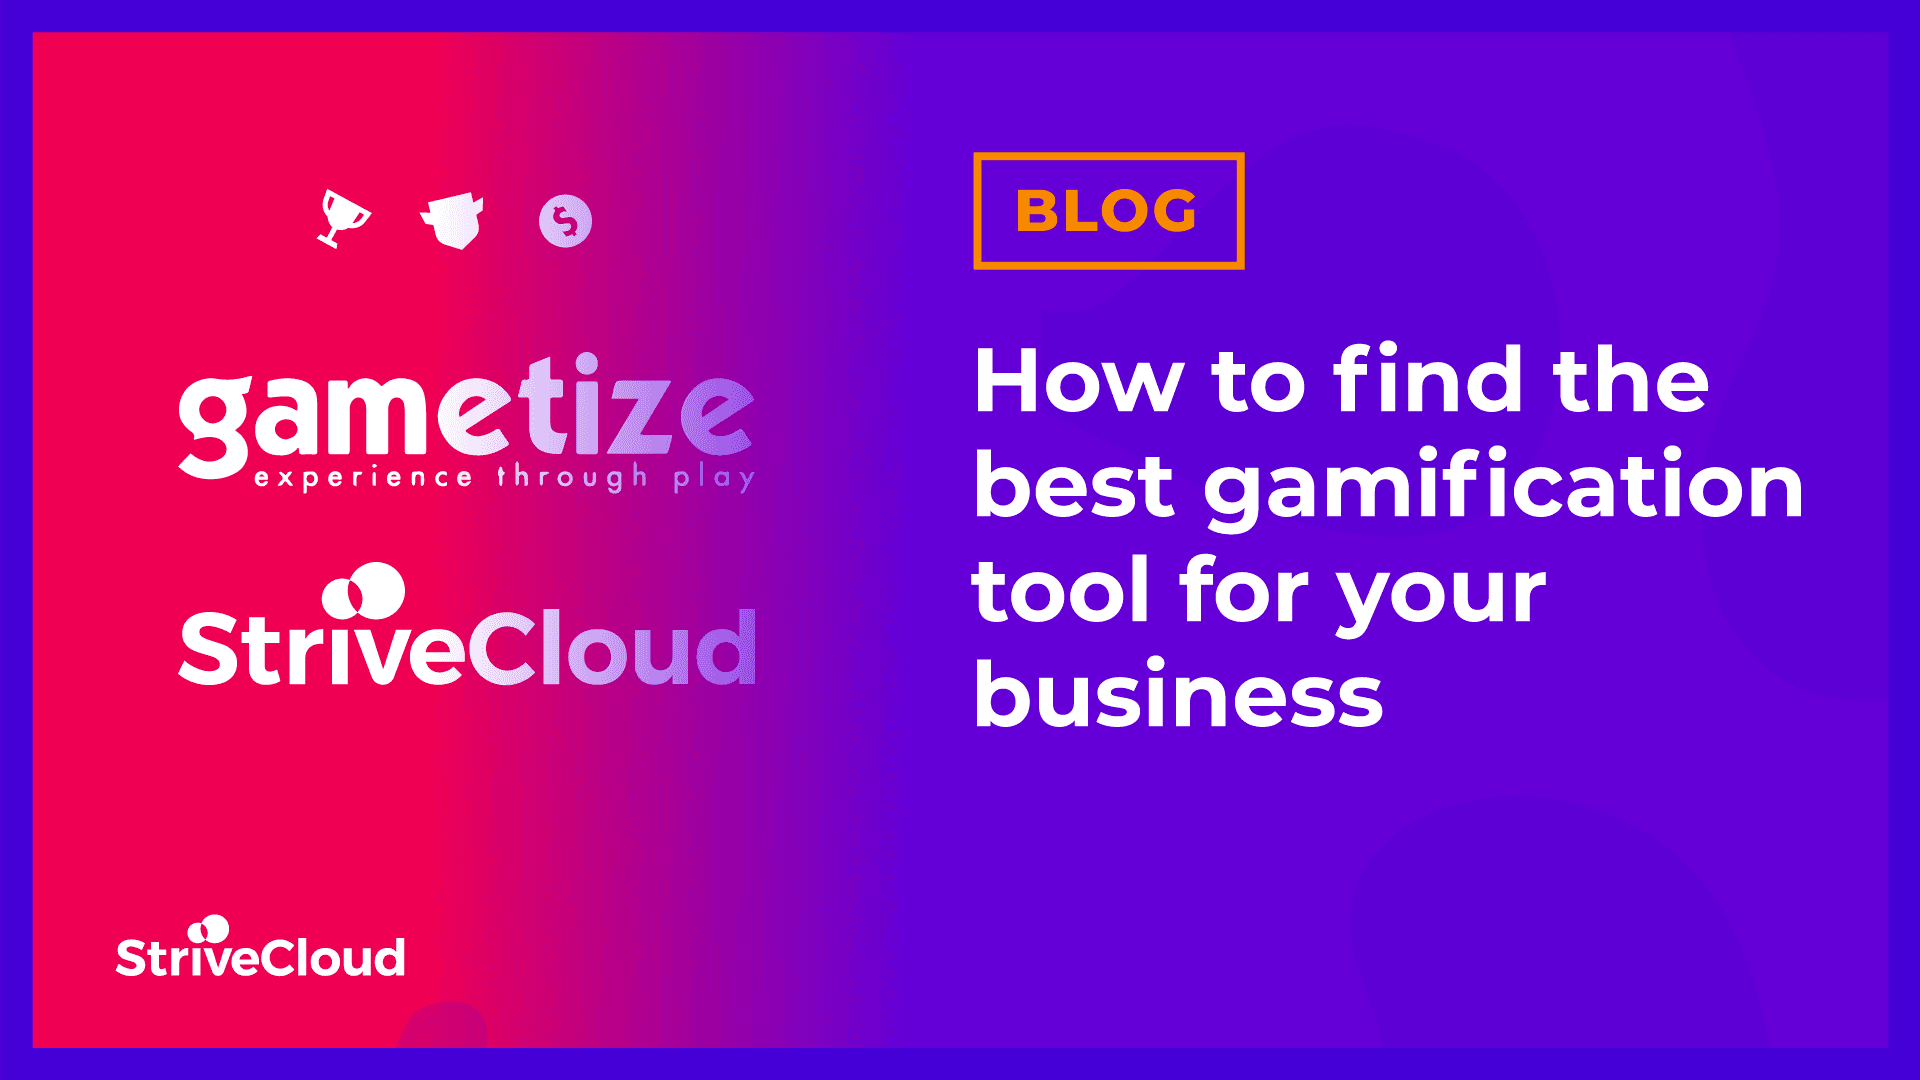 How to find the best gamification tool for your business